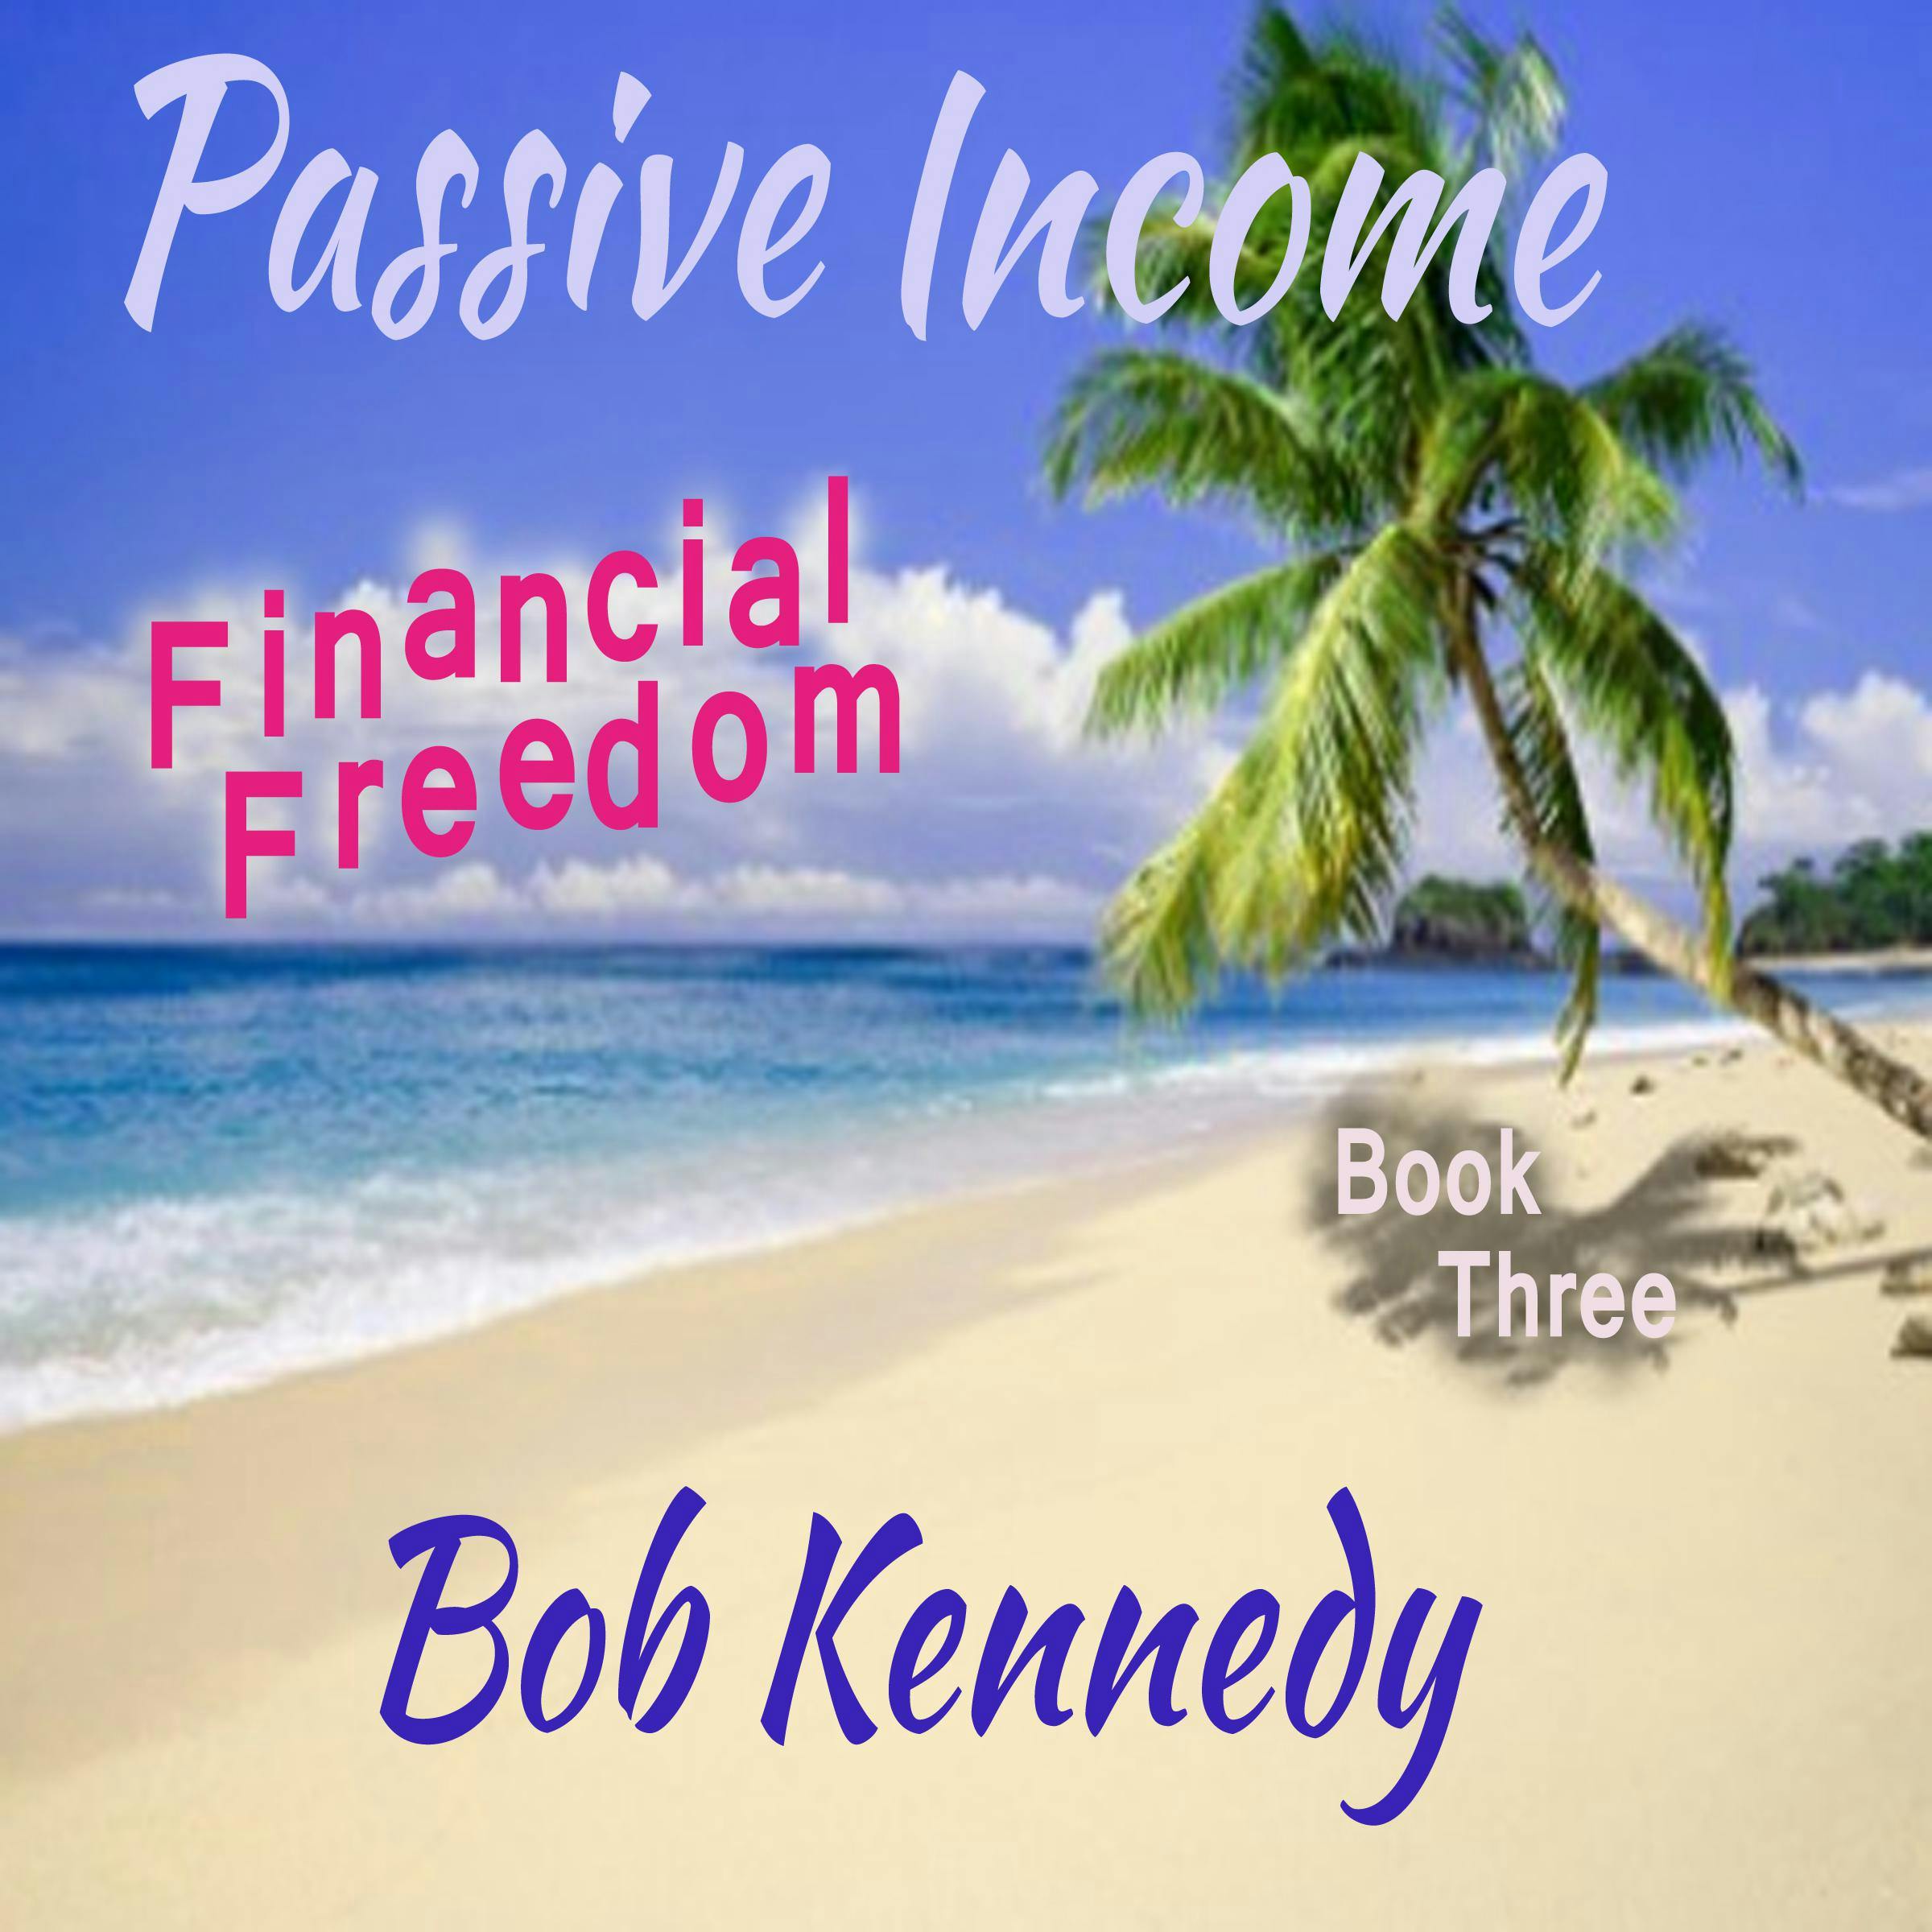 Passive Income - Financial Freedom  Book Three - undefined